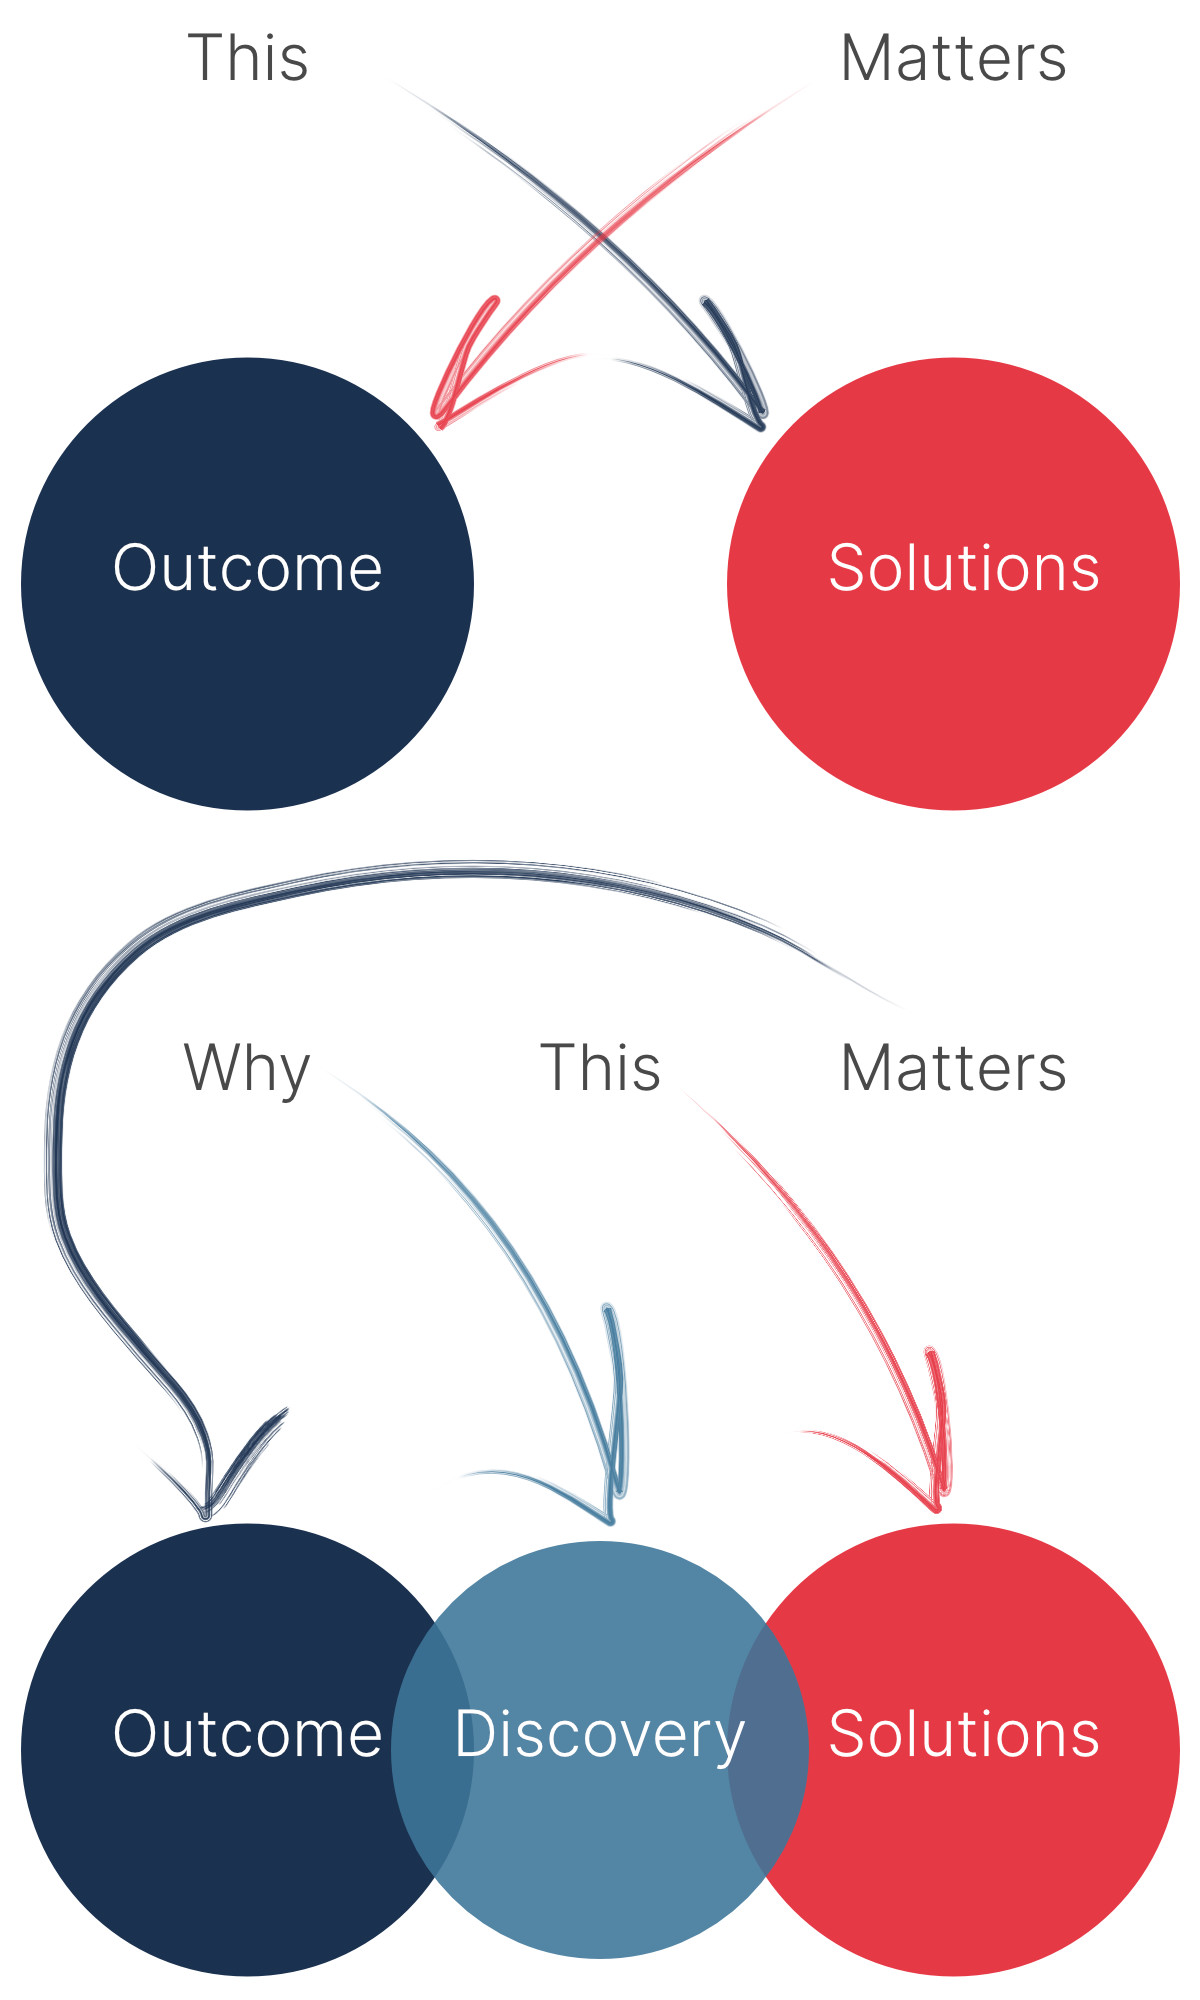 Outcomes to Solutions